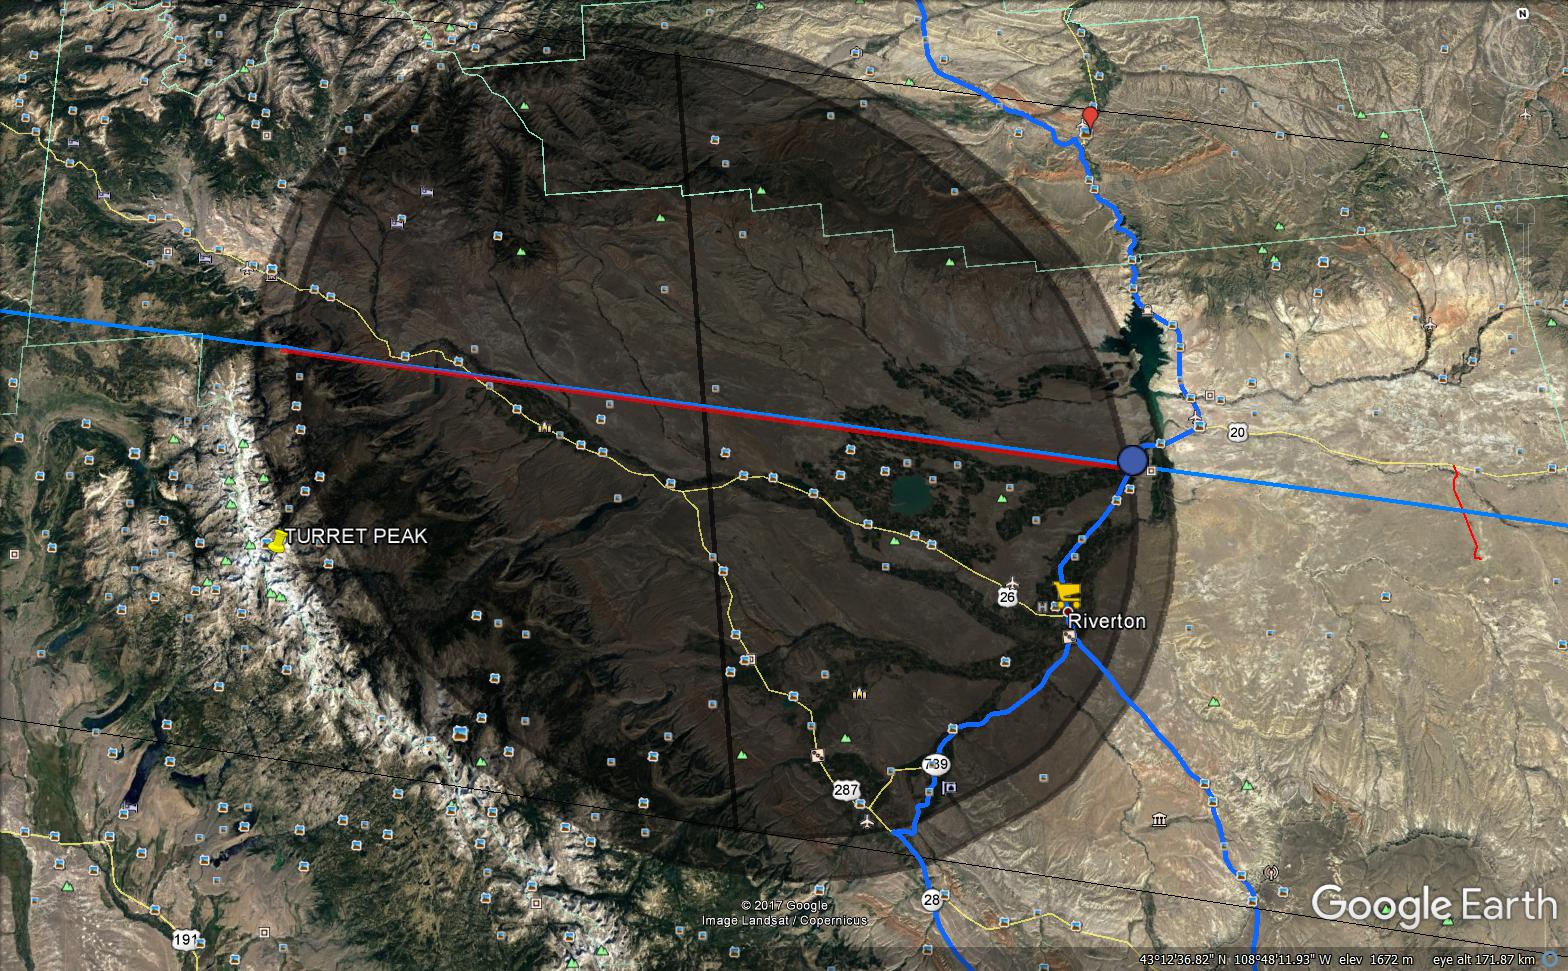 Umbra with grazing zones as shown in Google Earth